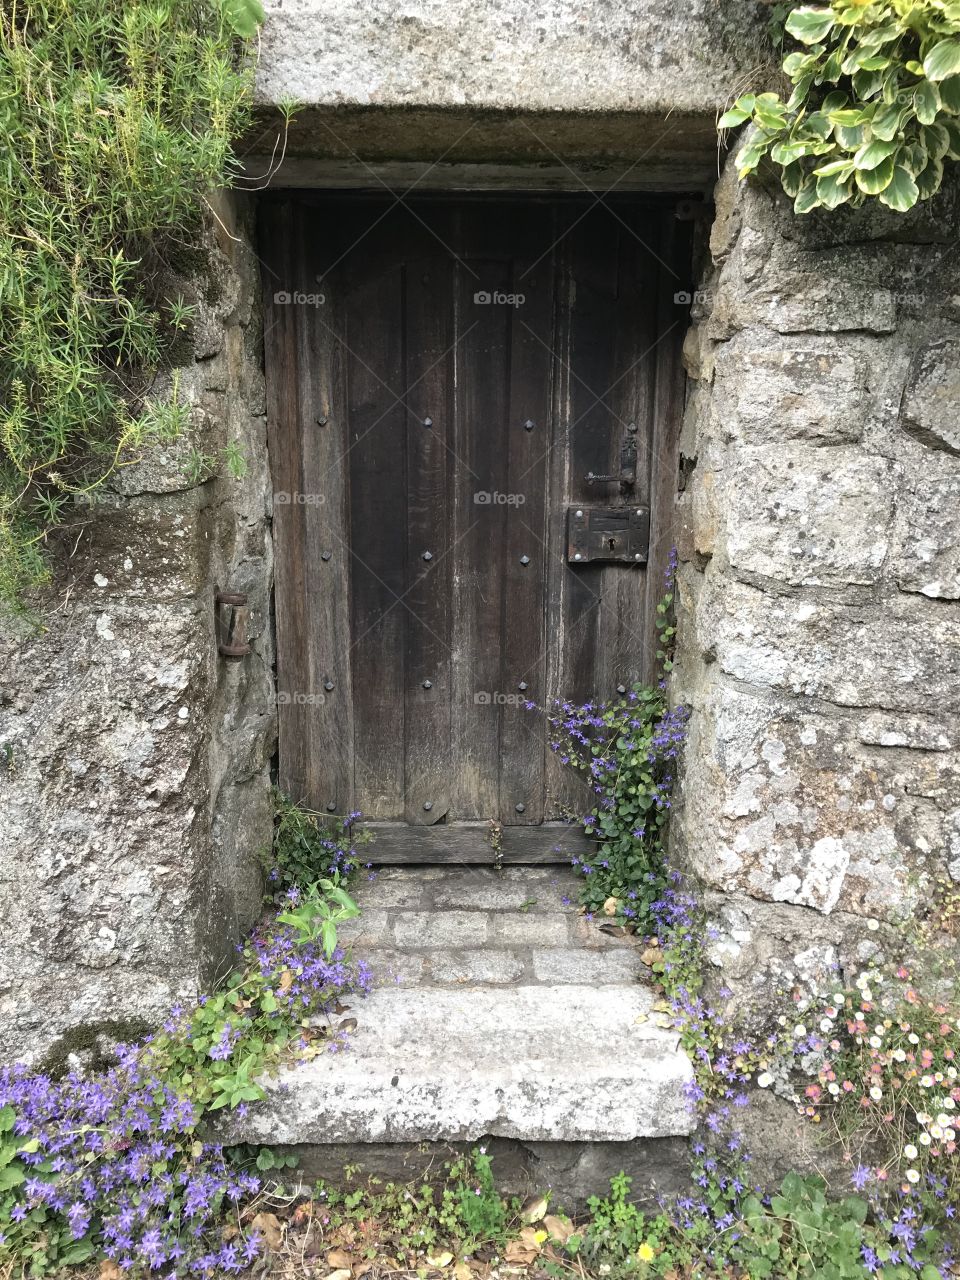 I found this lovely little Devon door, associated with a Devon farmhouse, l thought it was cute.